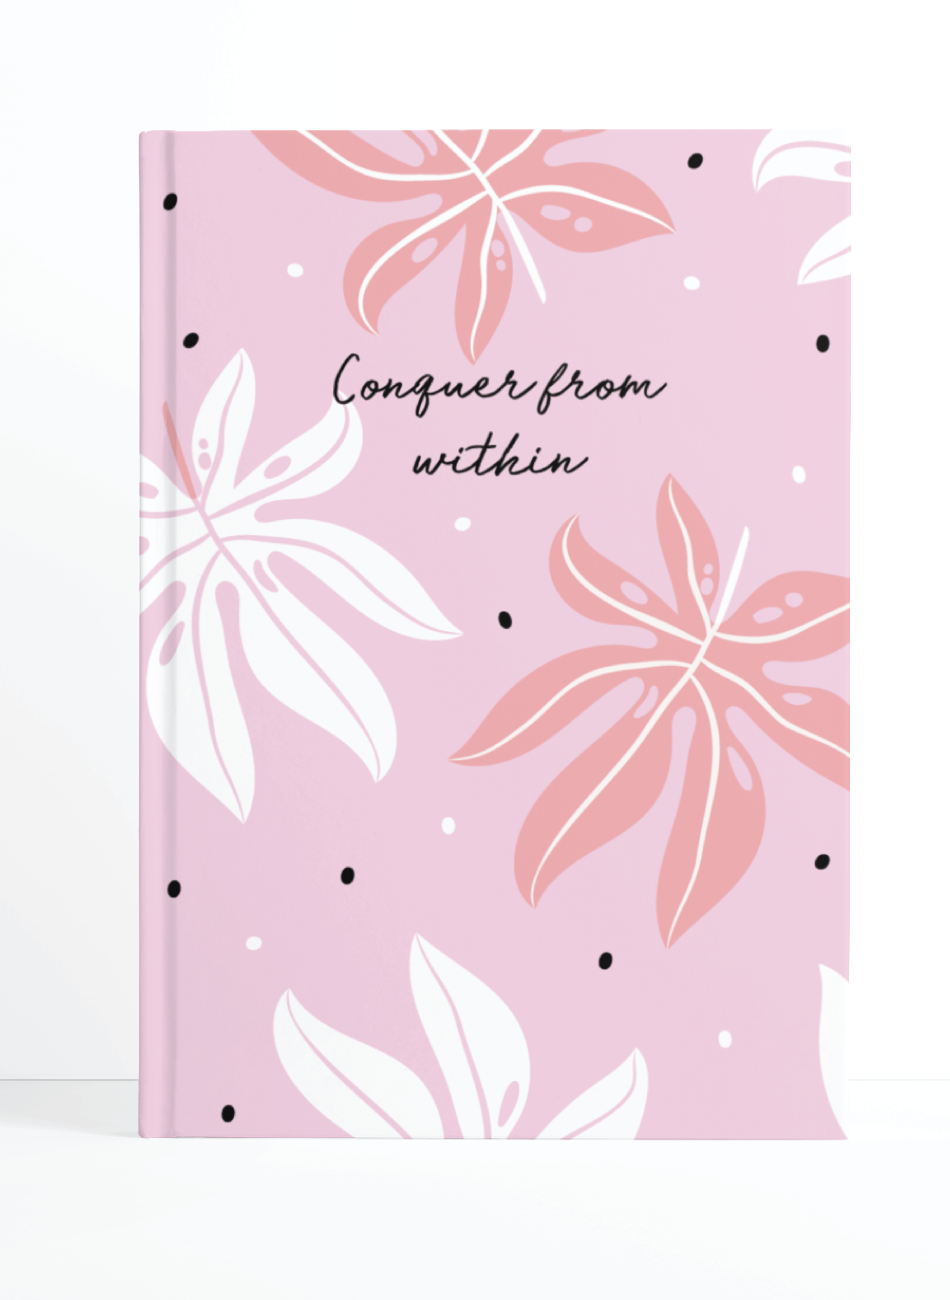 Conquer from Within Notebook | Available in various sizes